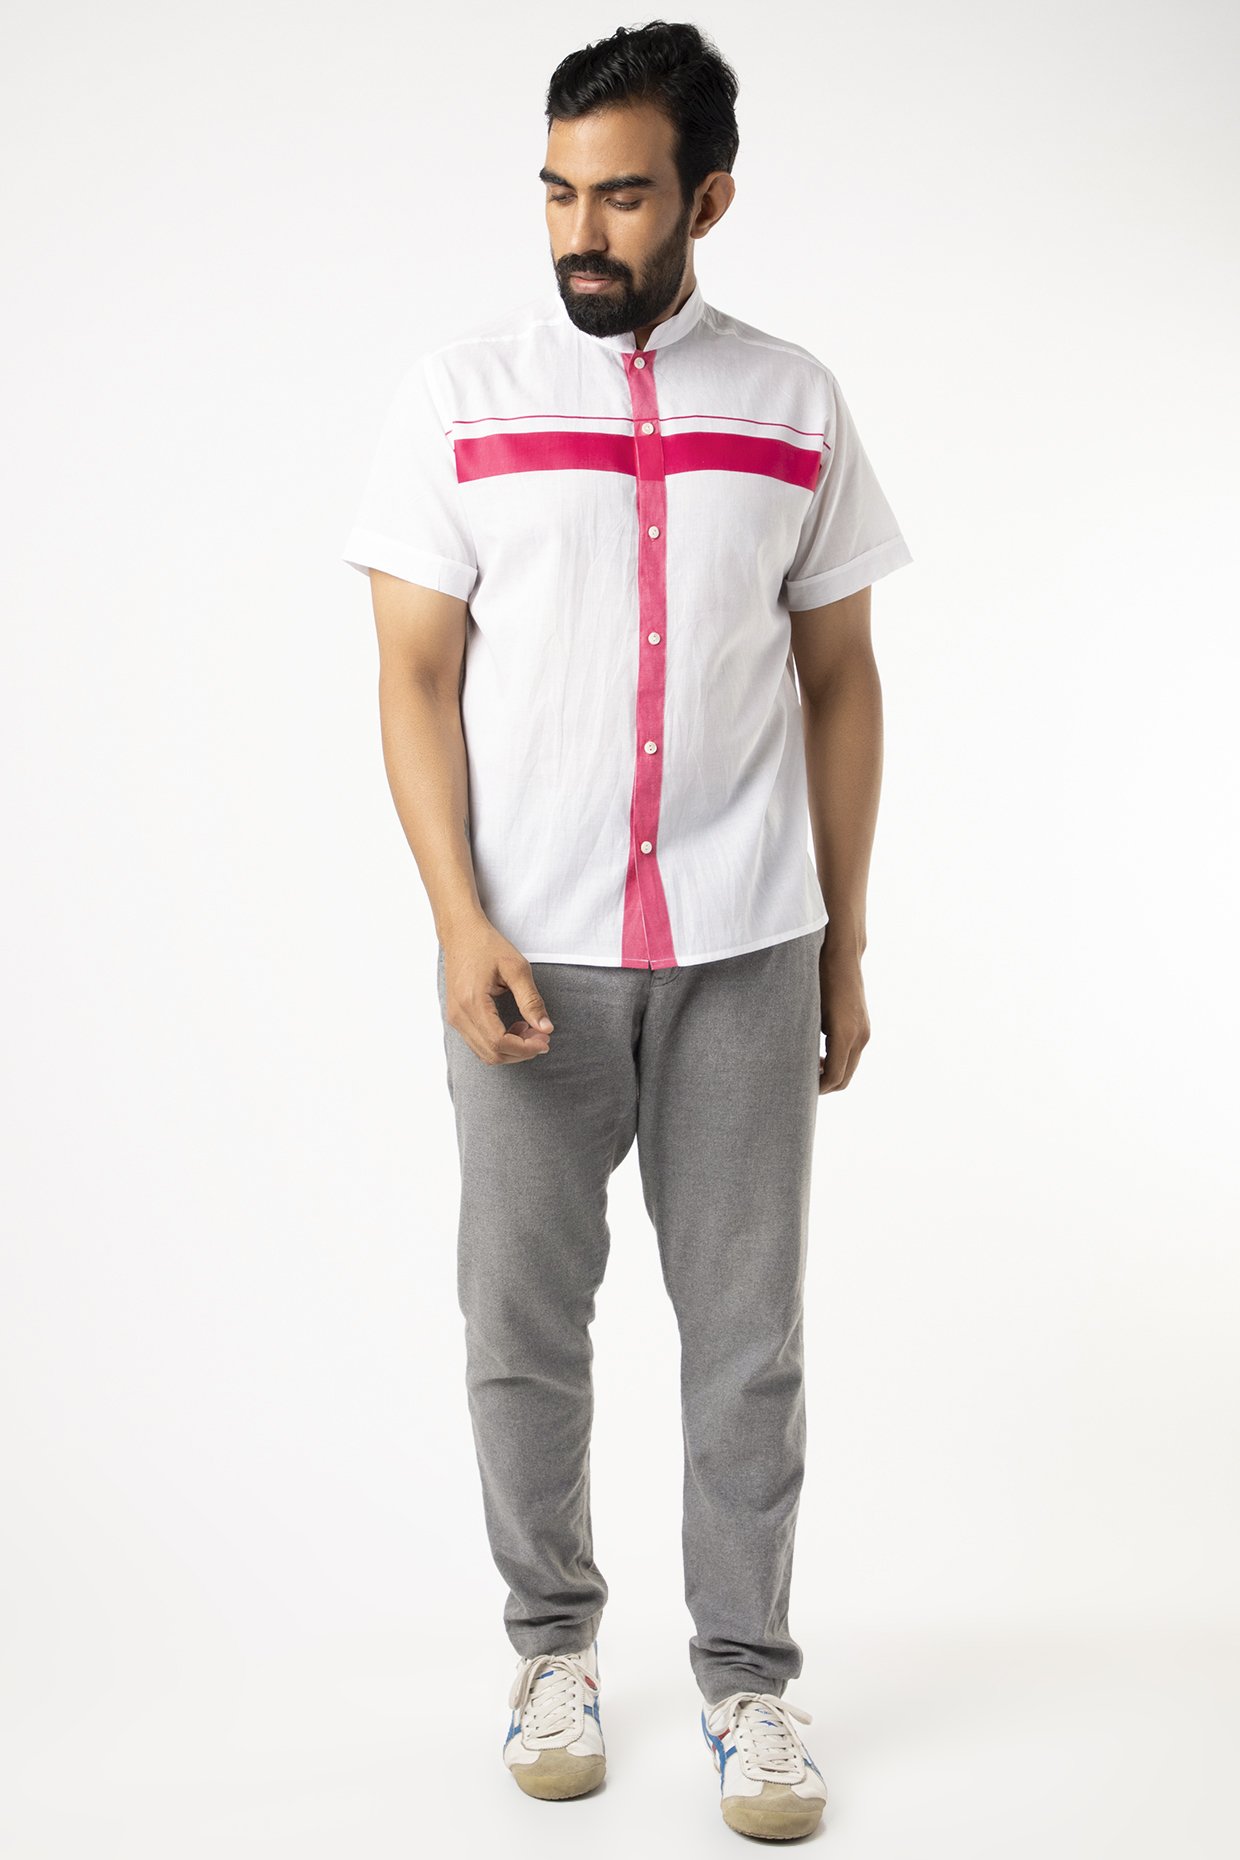 CODE by�Lifestyle Men Solid Casual Pink Shirt - Buy CODE by�Lifestyle Men  Solid Casual Pink Shirt Online at Best Prices in India | Flipkart.com